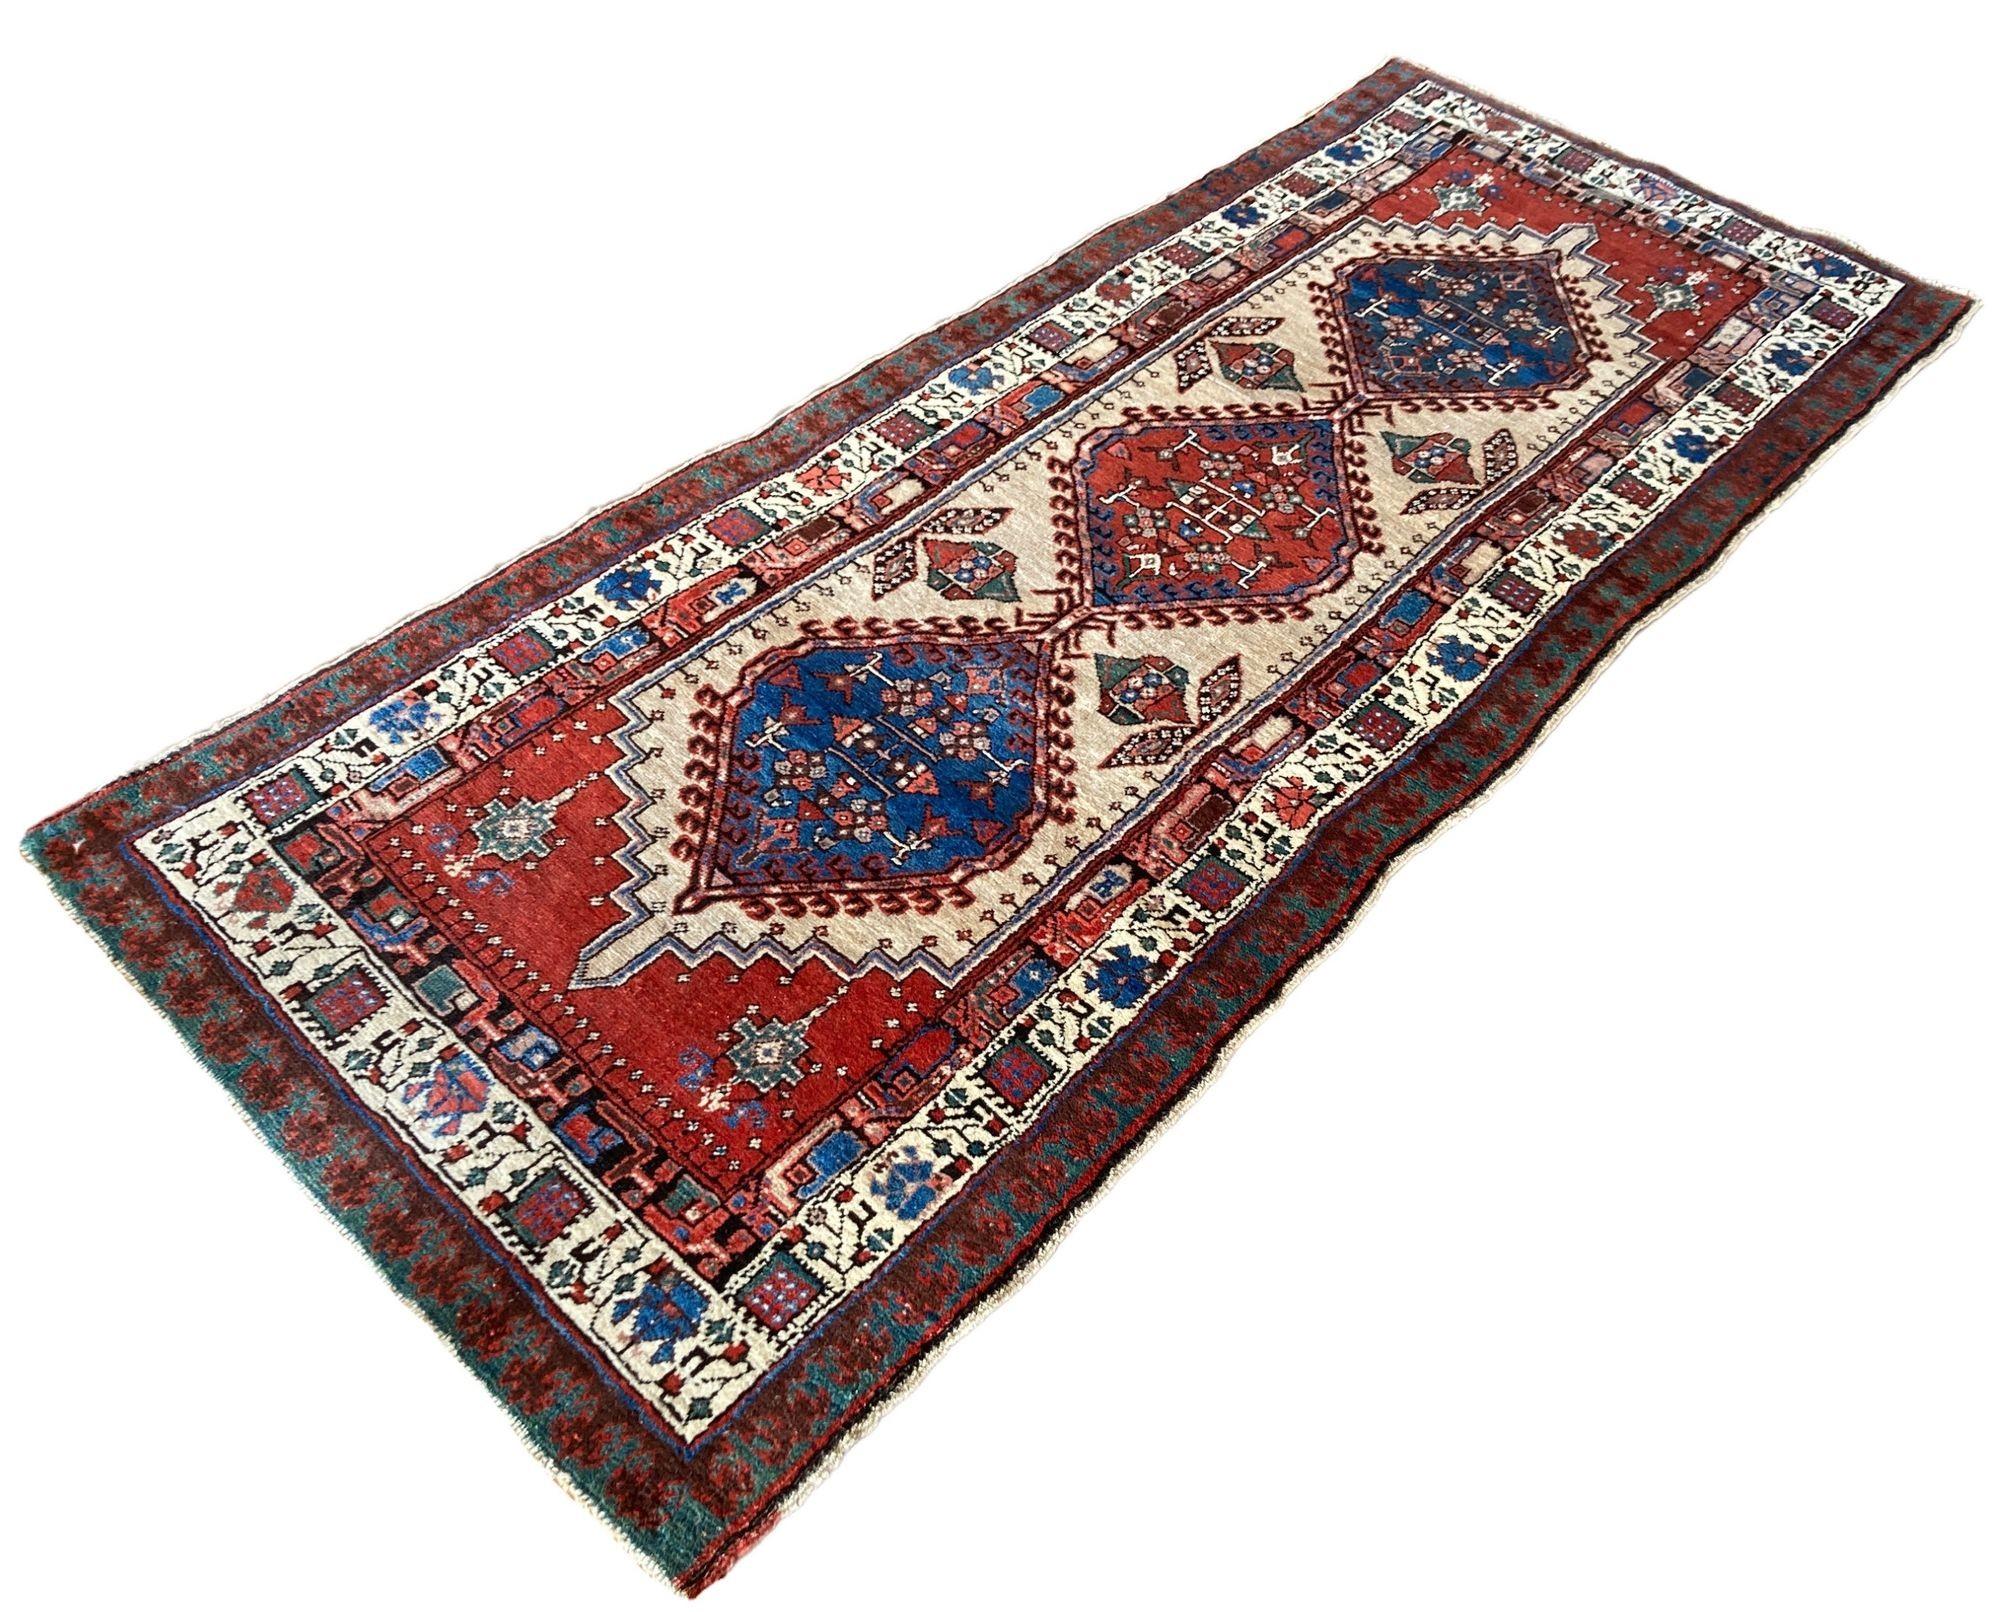 Antique Sarab Runner 2.22m x 0.89m In Good Condition For Sale In St. Albans, GB